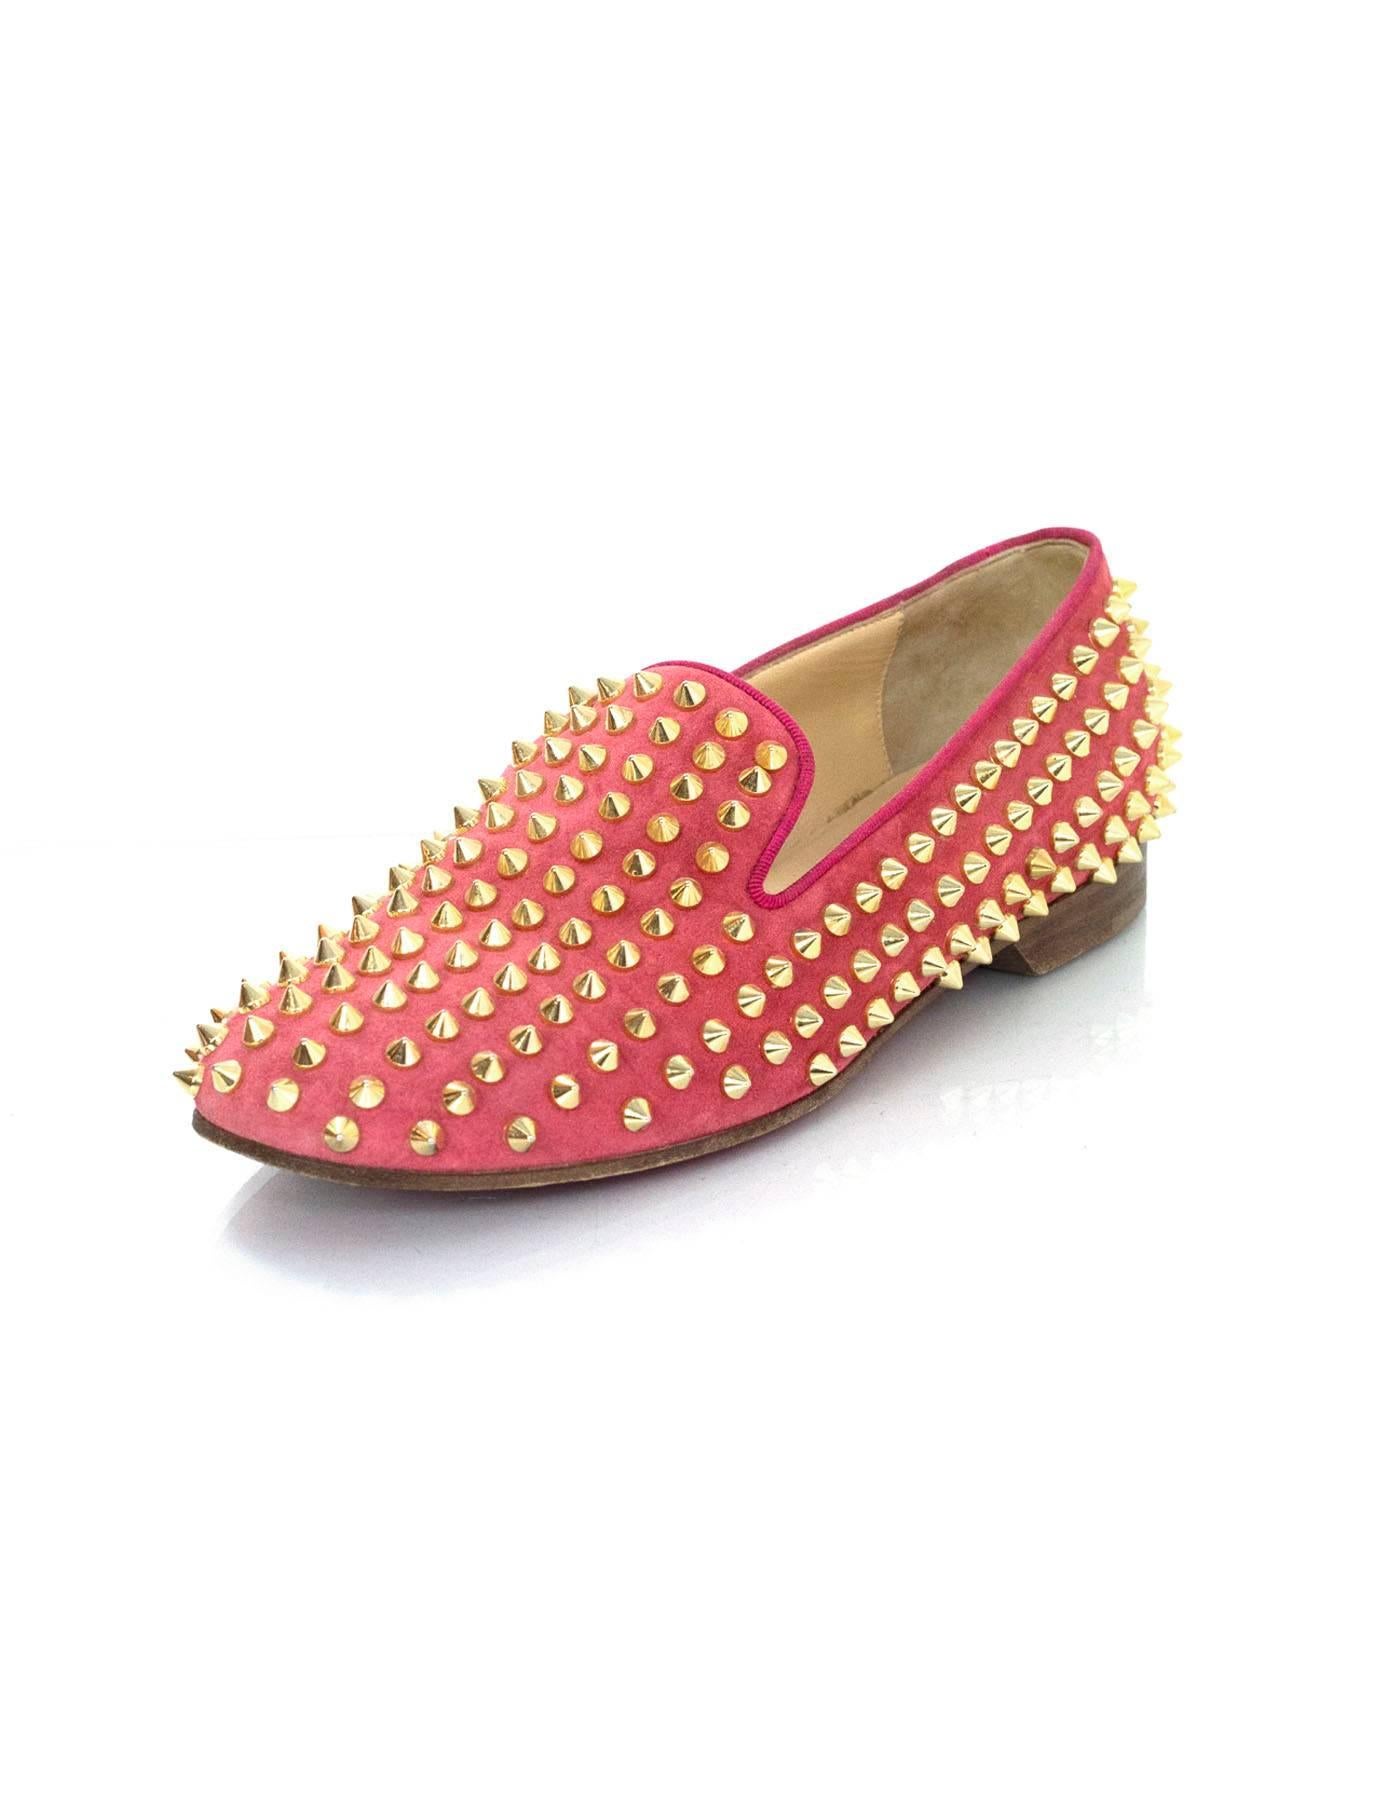 Christian Louboutin Coral Suede Rolling Spike Loafers sz 37.5.  
Features coral suede and goldtone studding throughout

Made In: Italy
Color: Coral, goldtone
Closure/Opening: Slip on
Retail Price: $1,050 + tax
Sole Stamp: Christian Louboutin MADE IN